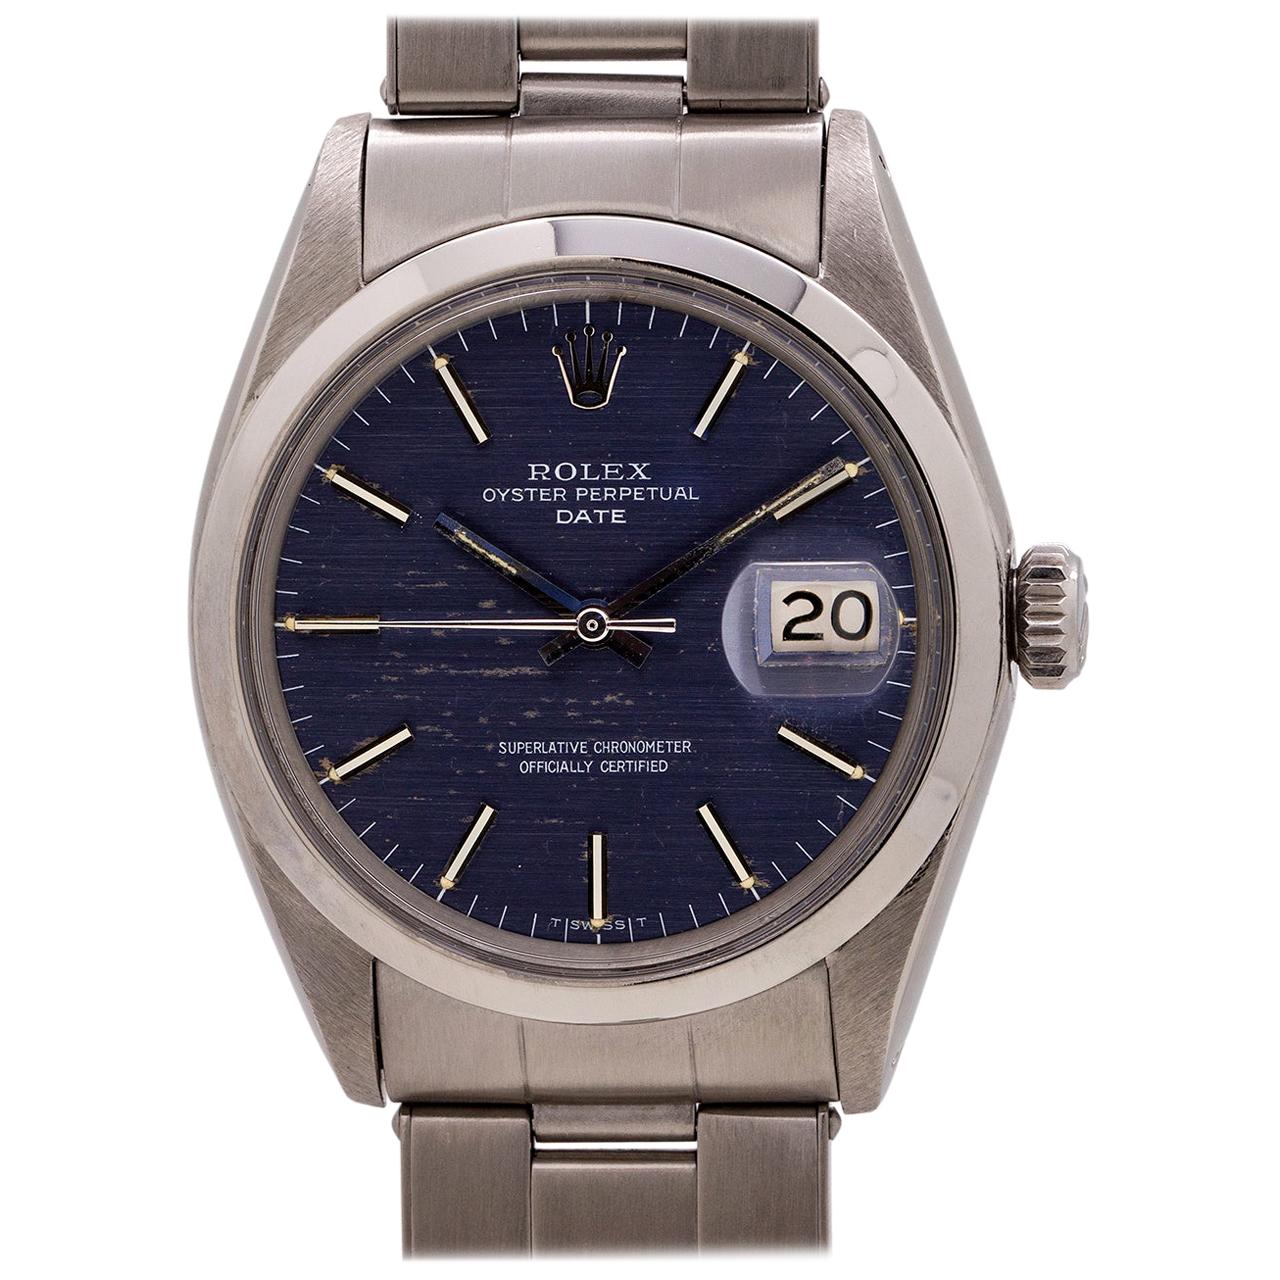 Rolex Oyster Perpetual Date Stainless Steel Ref 1500, circa 1967 For Sale